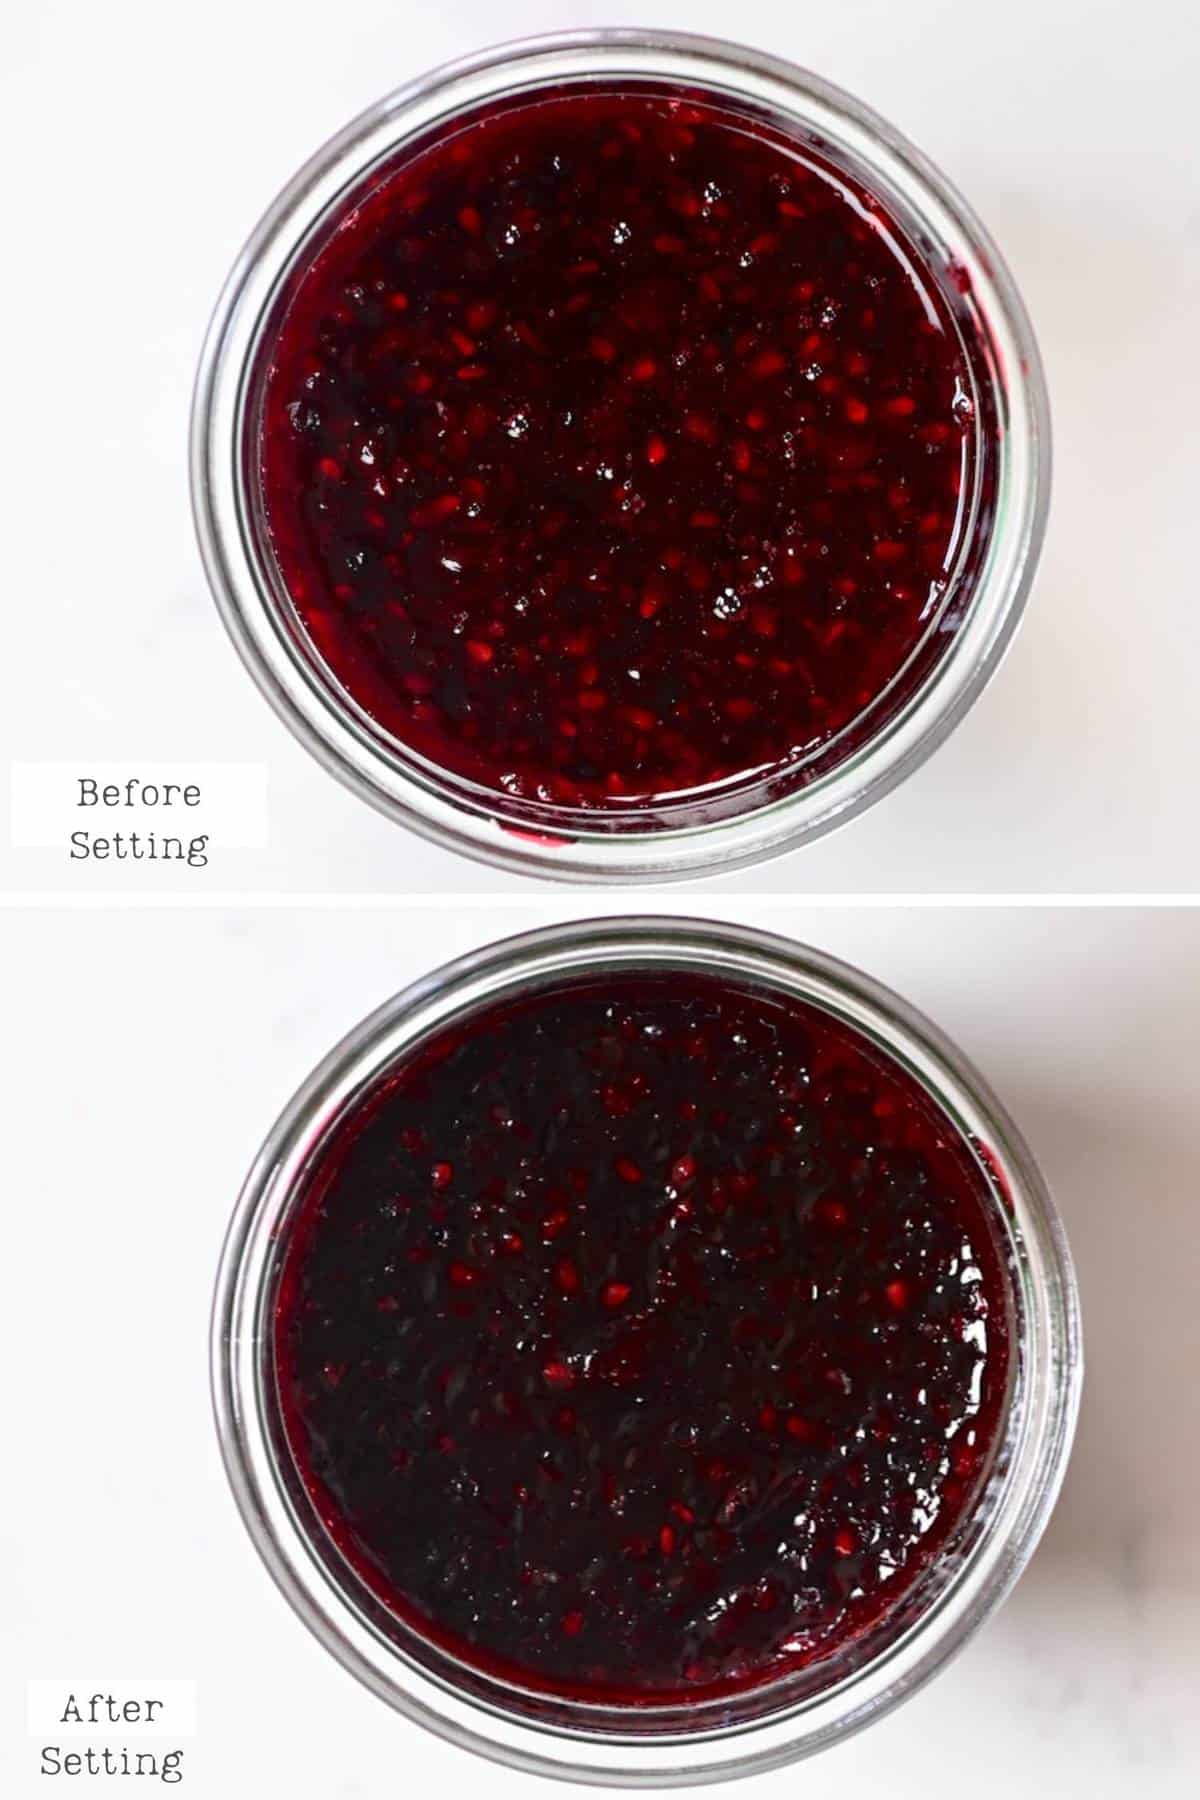 Blackberry Jam before and after setting